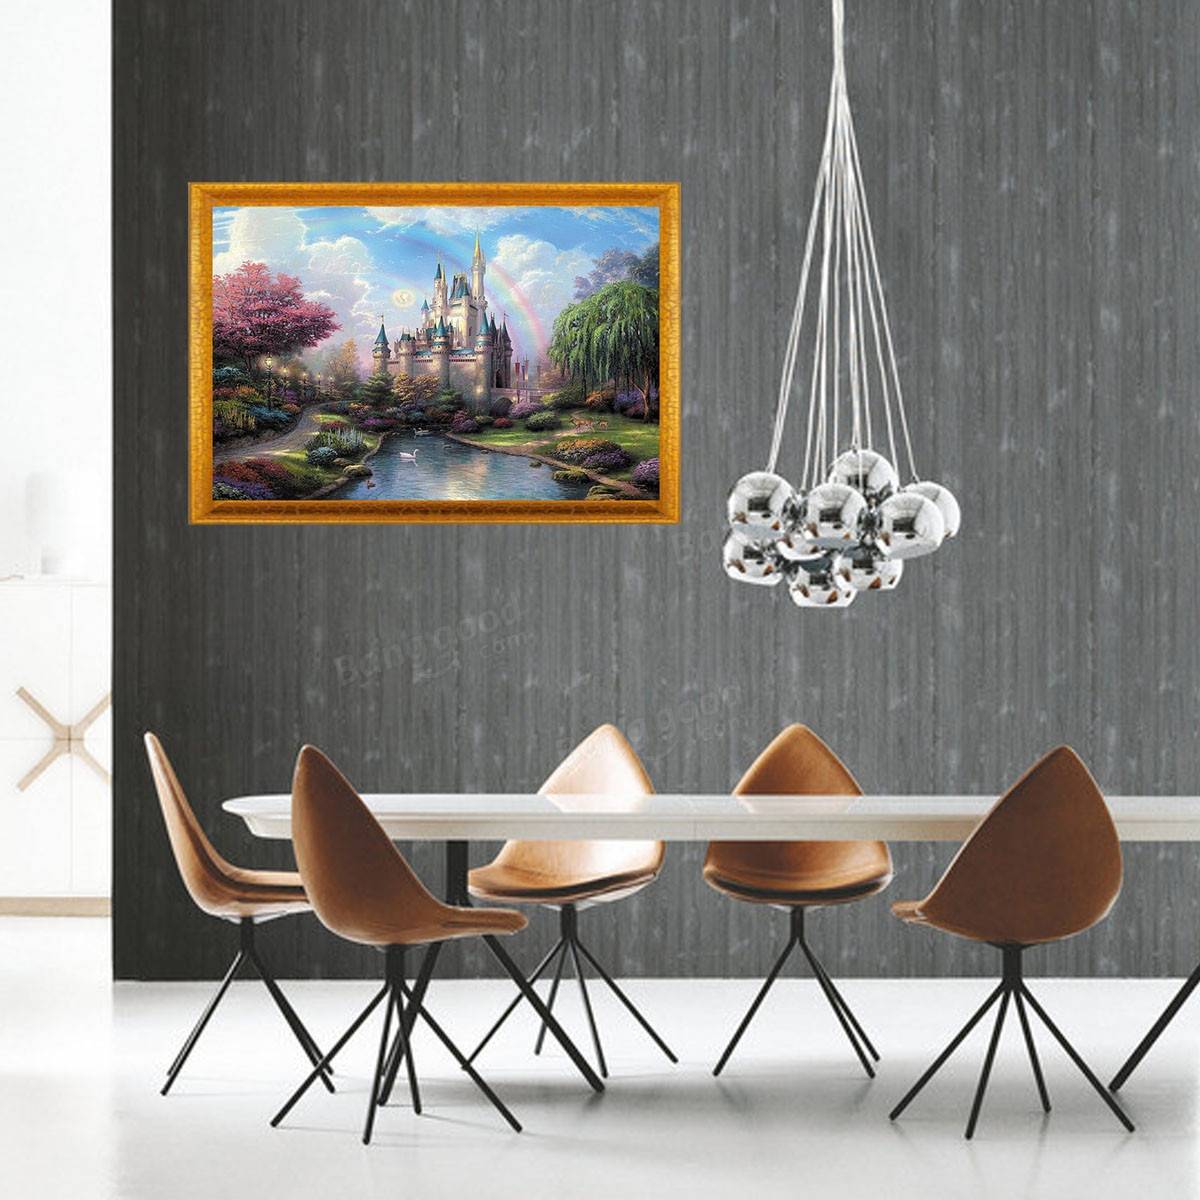 Digital Oil Painting Castle DIY Oil Painting By Numbers Kits Tower Frameless Canvas Home Wall Decor 40x50cm